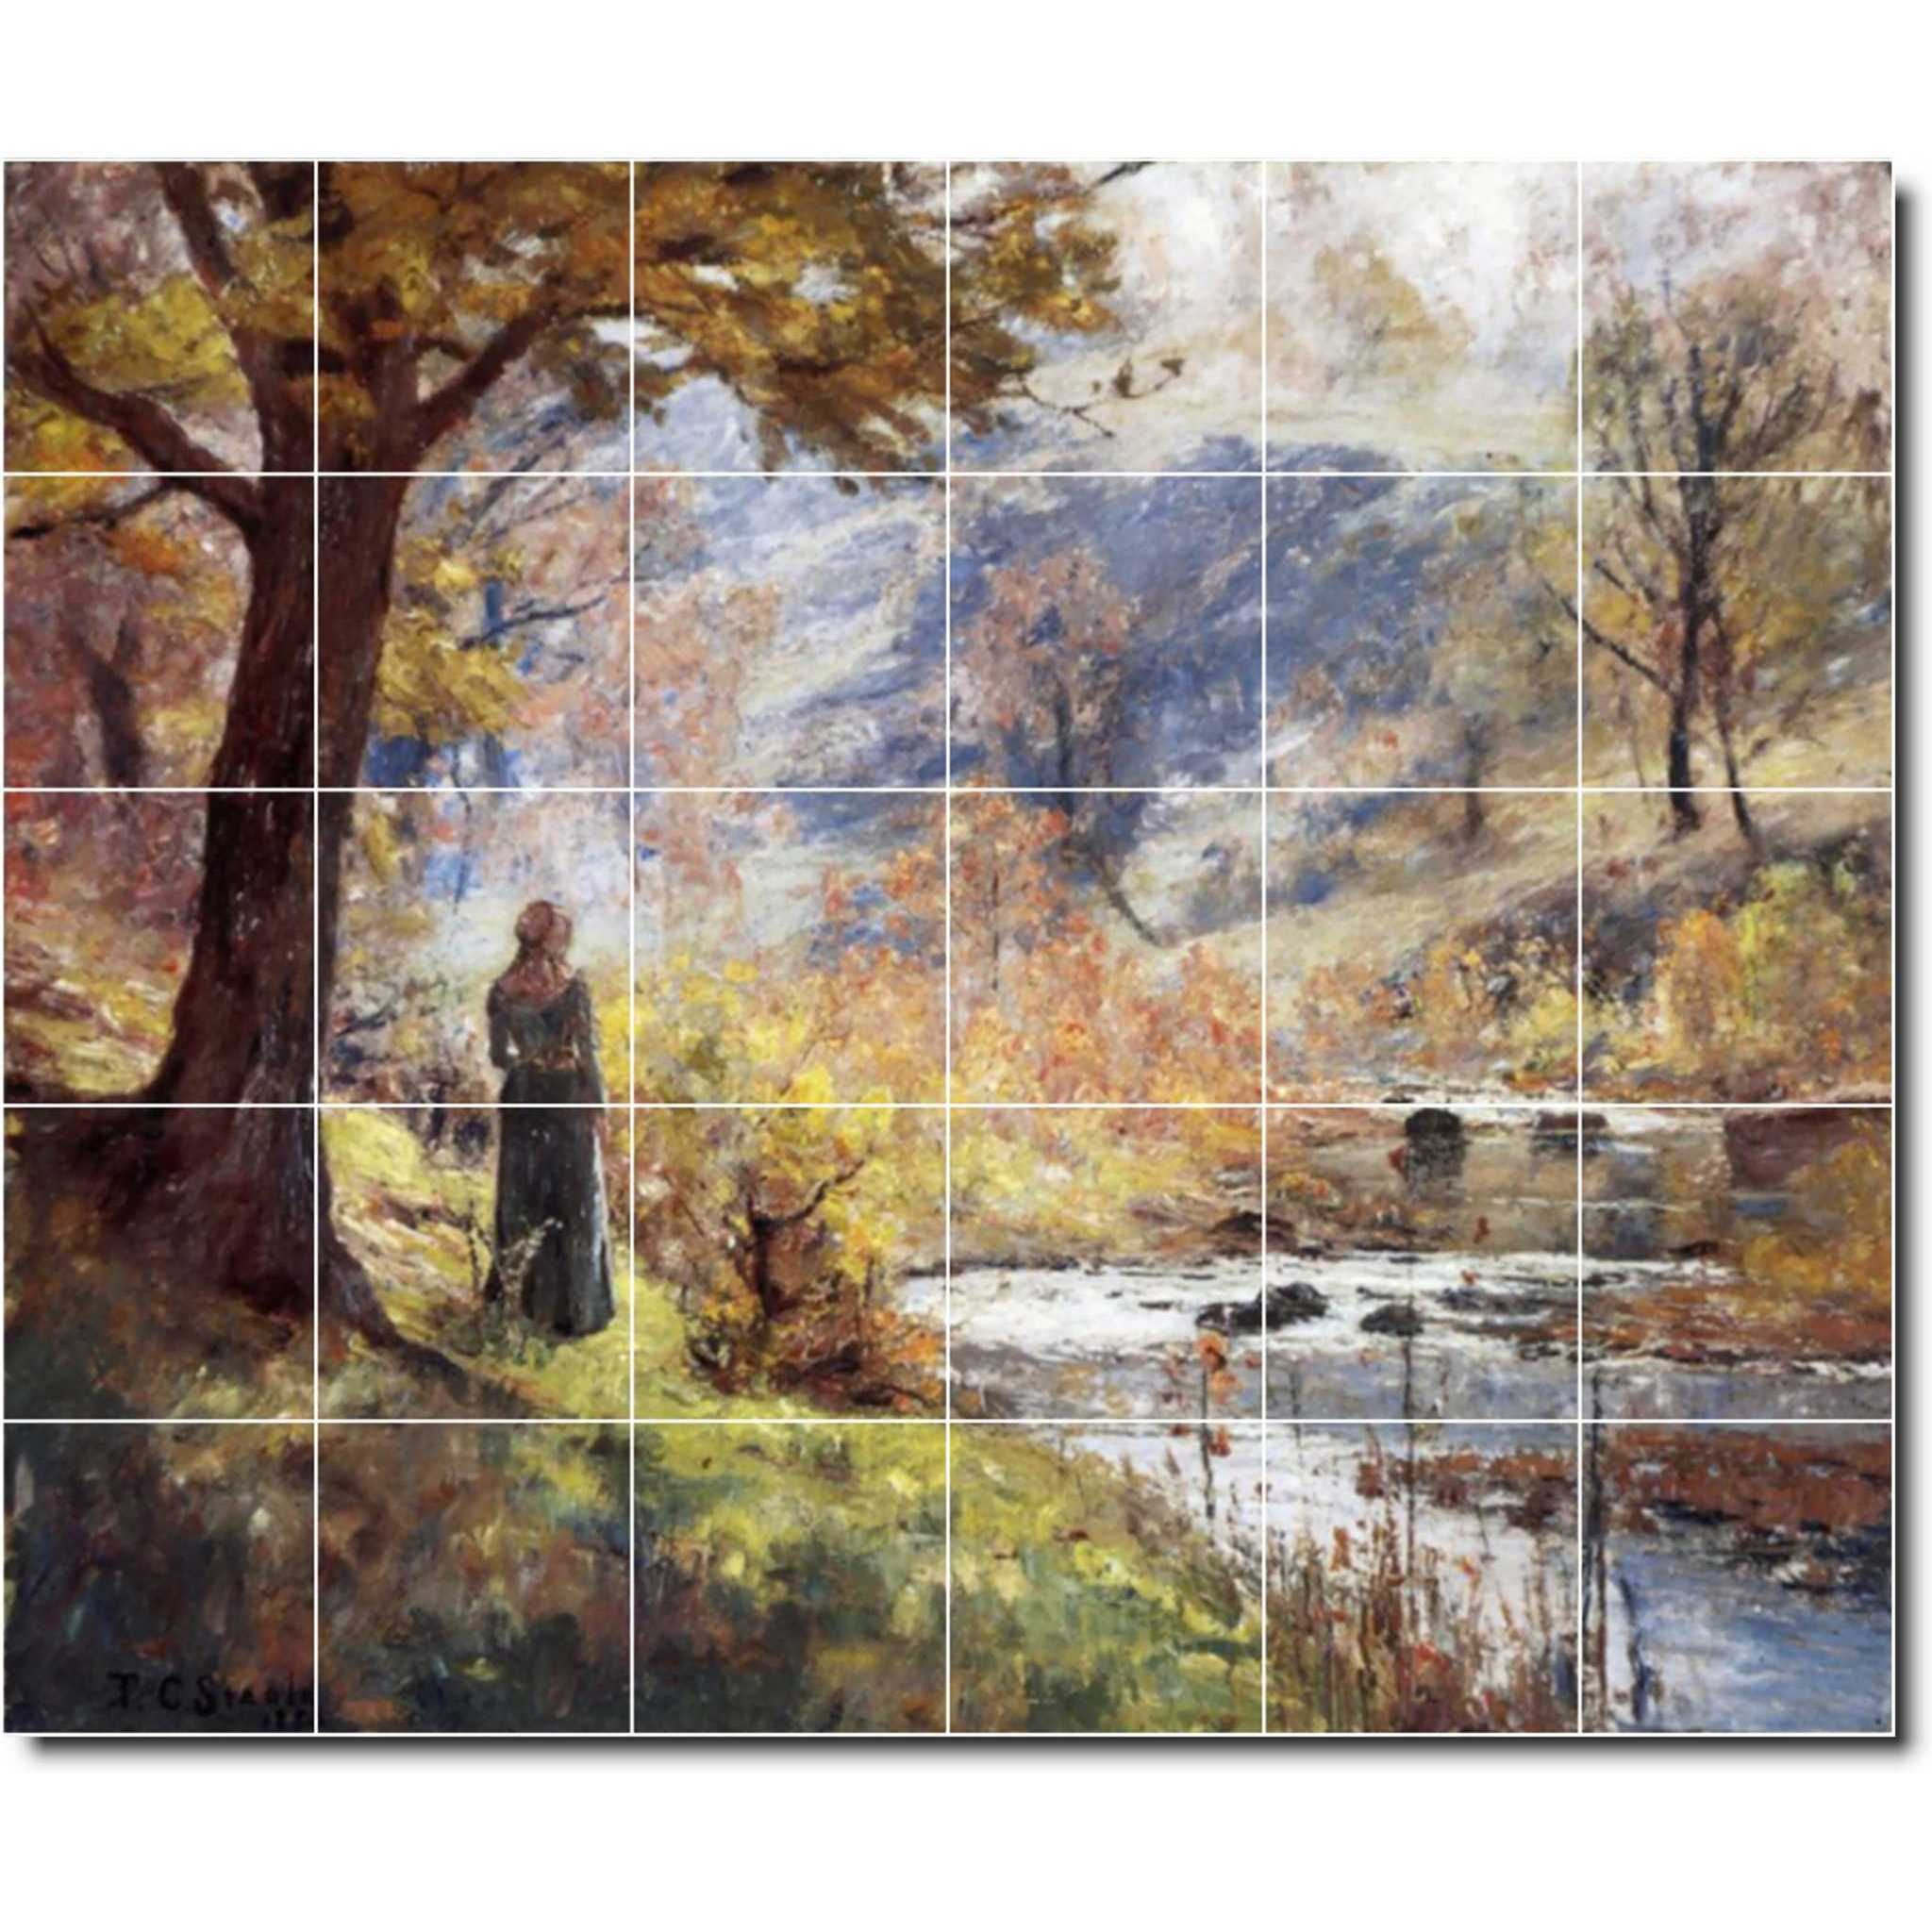 theodore steele country painting ceramic tile mural p08385